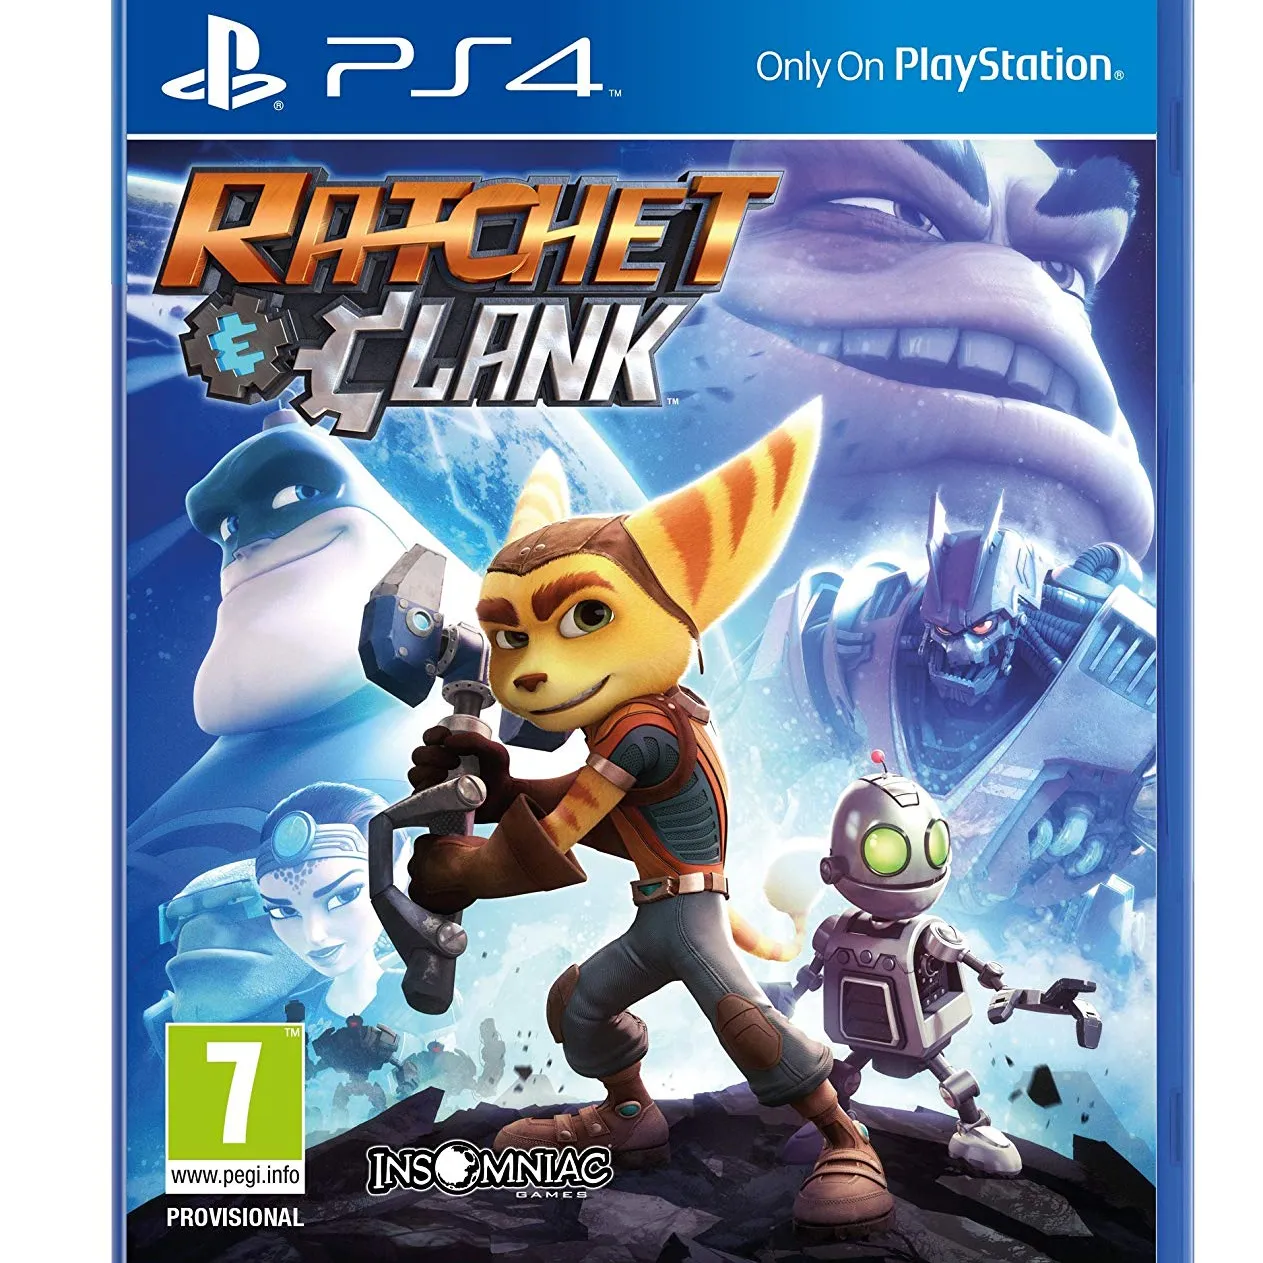 Ratchet & Clank: will trade for another PS4 game photo 1